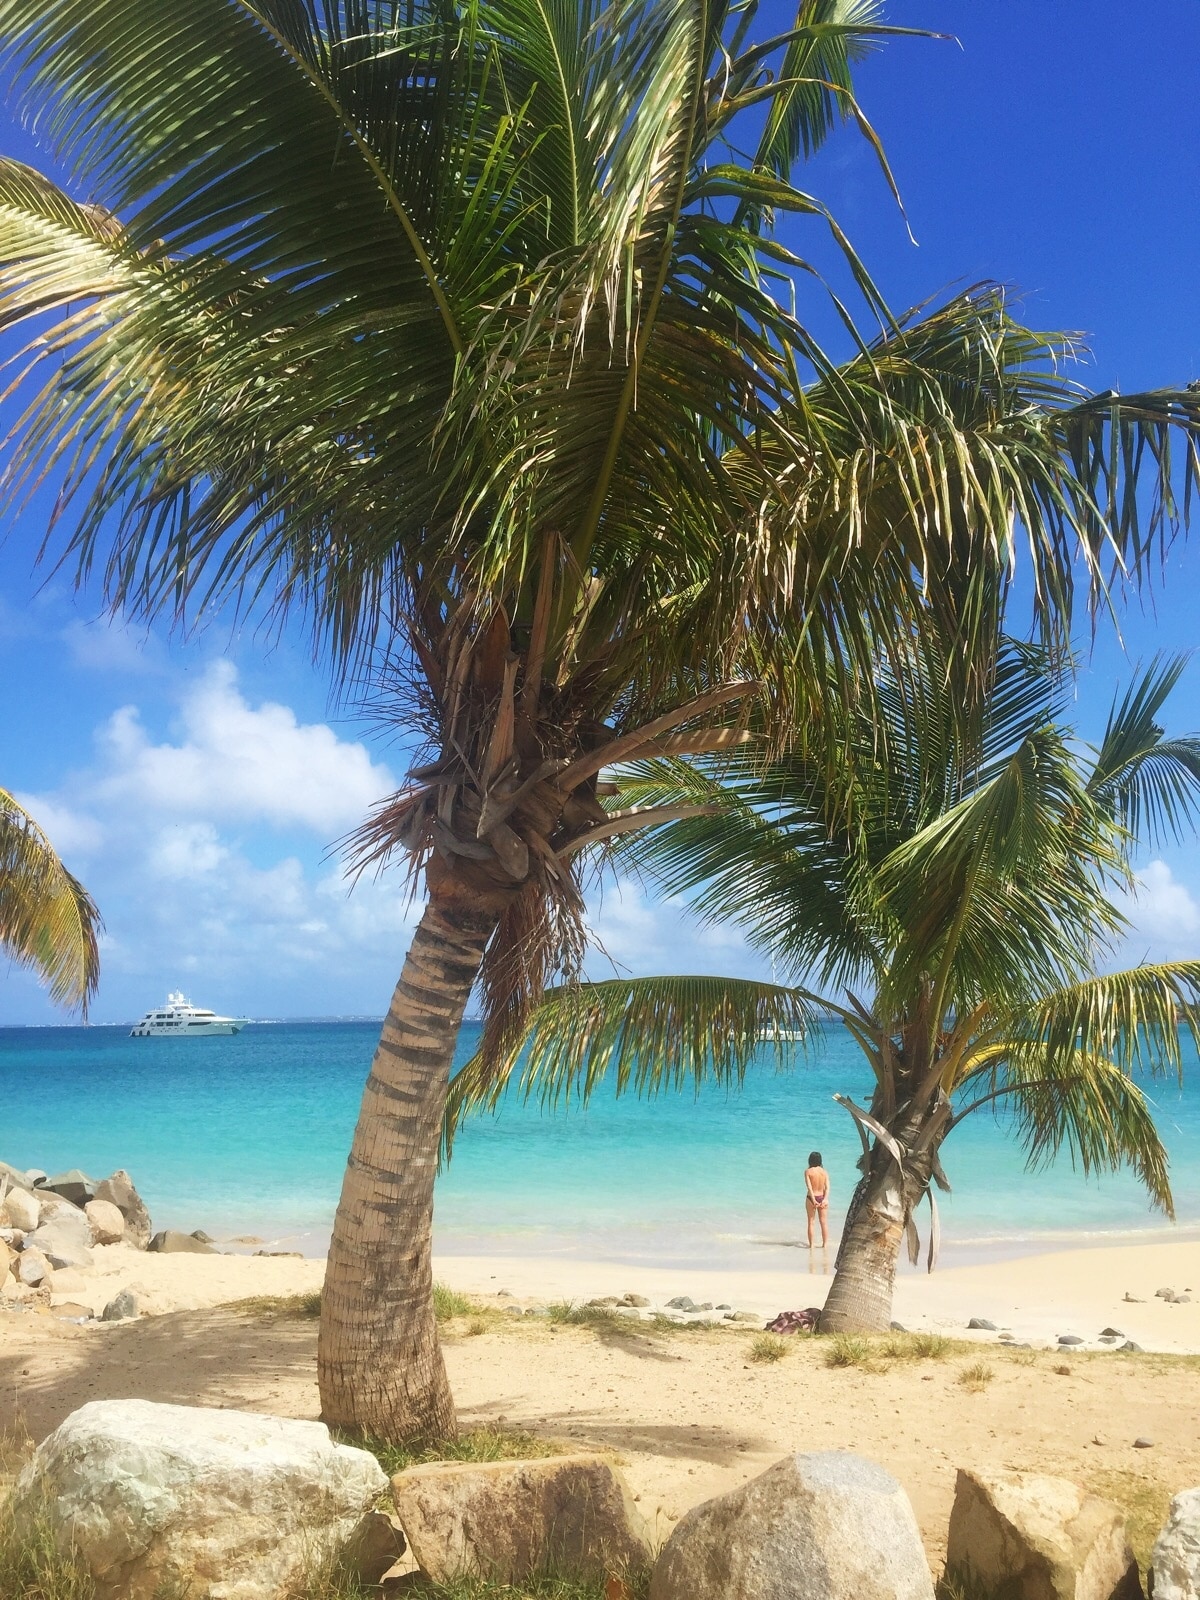 Friar's Beach is a small, quiet beach on the French side of the island. 
It doesn't get much better than this!!! ☀️🌴🐠
#blue #AquaTrove #BeachTips